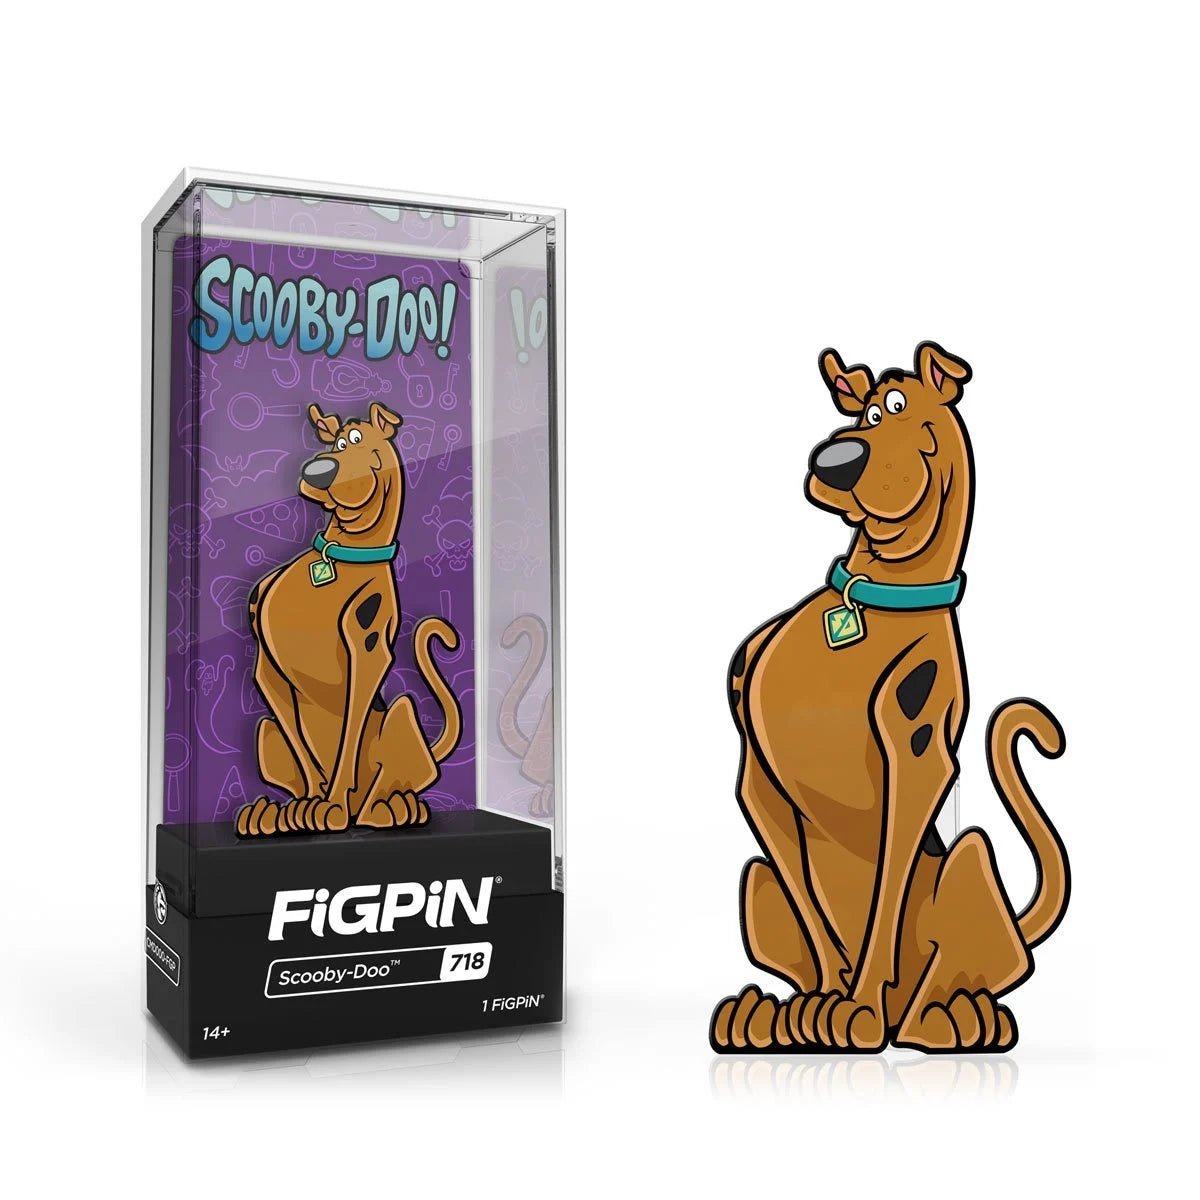 Scooby-Doo FiGPiN Classic 3-Inch Enamel Pin - Simon's Collectibles